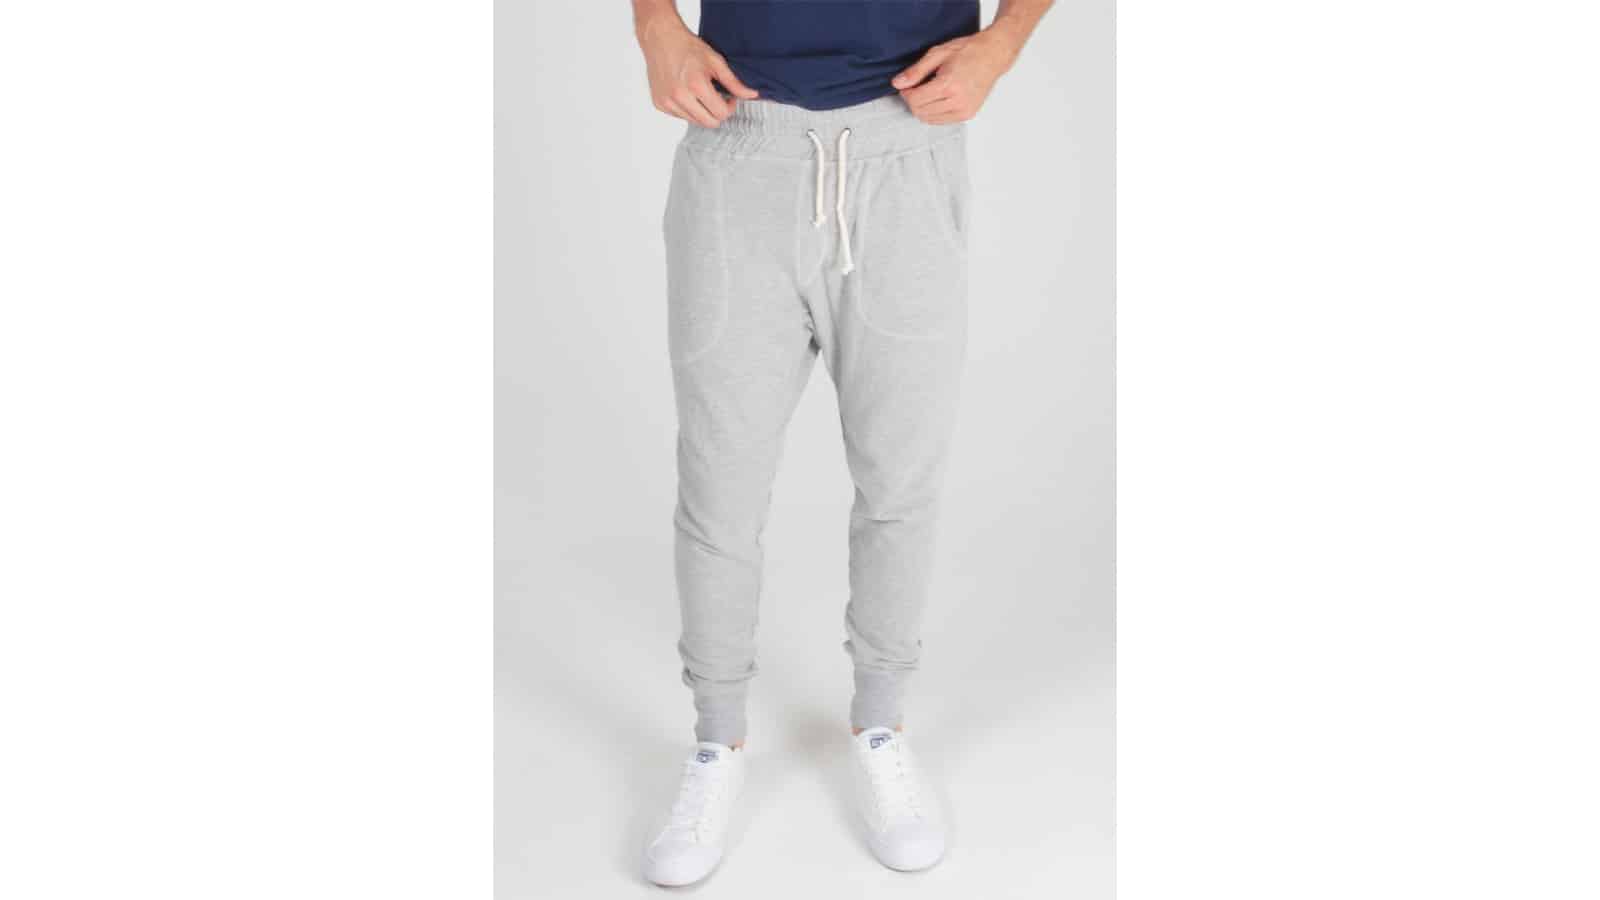 American Made Supply Co gray joggers featured in gift ideas for the boyfriend or husband